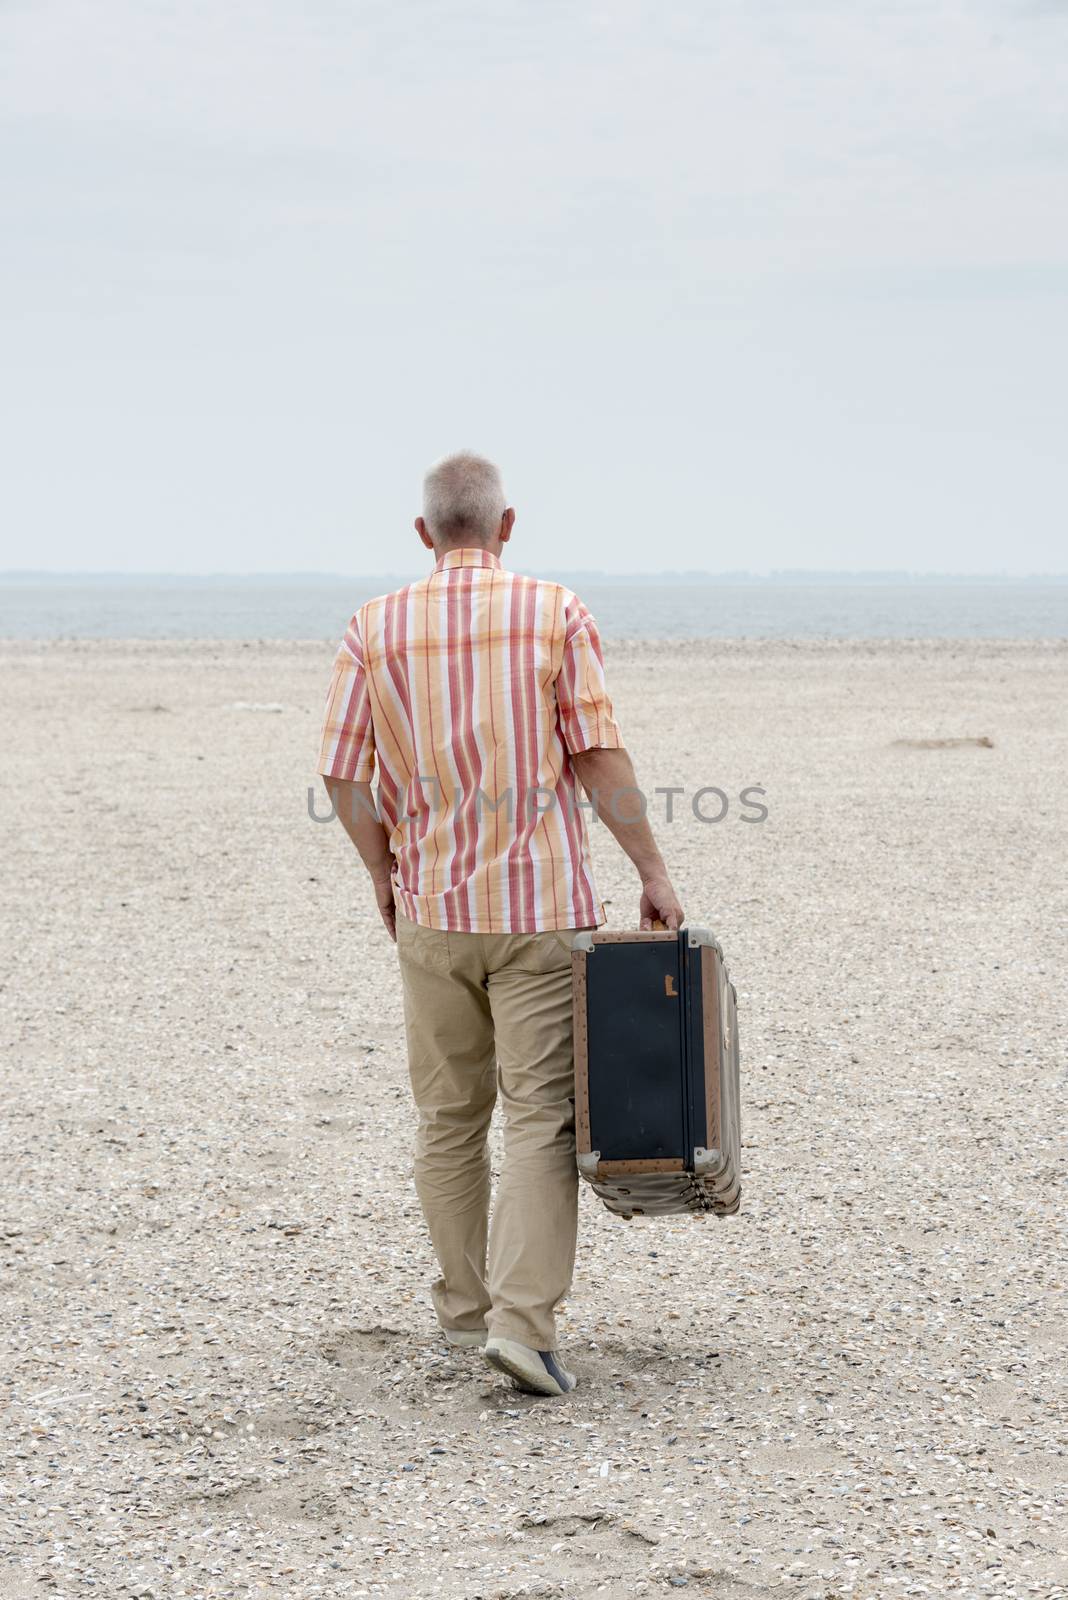  man with old suitcase   by compuinfoto